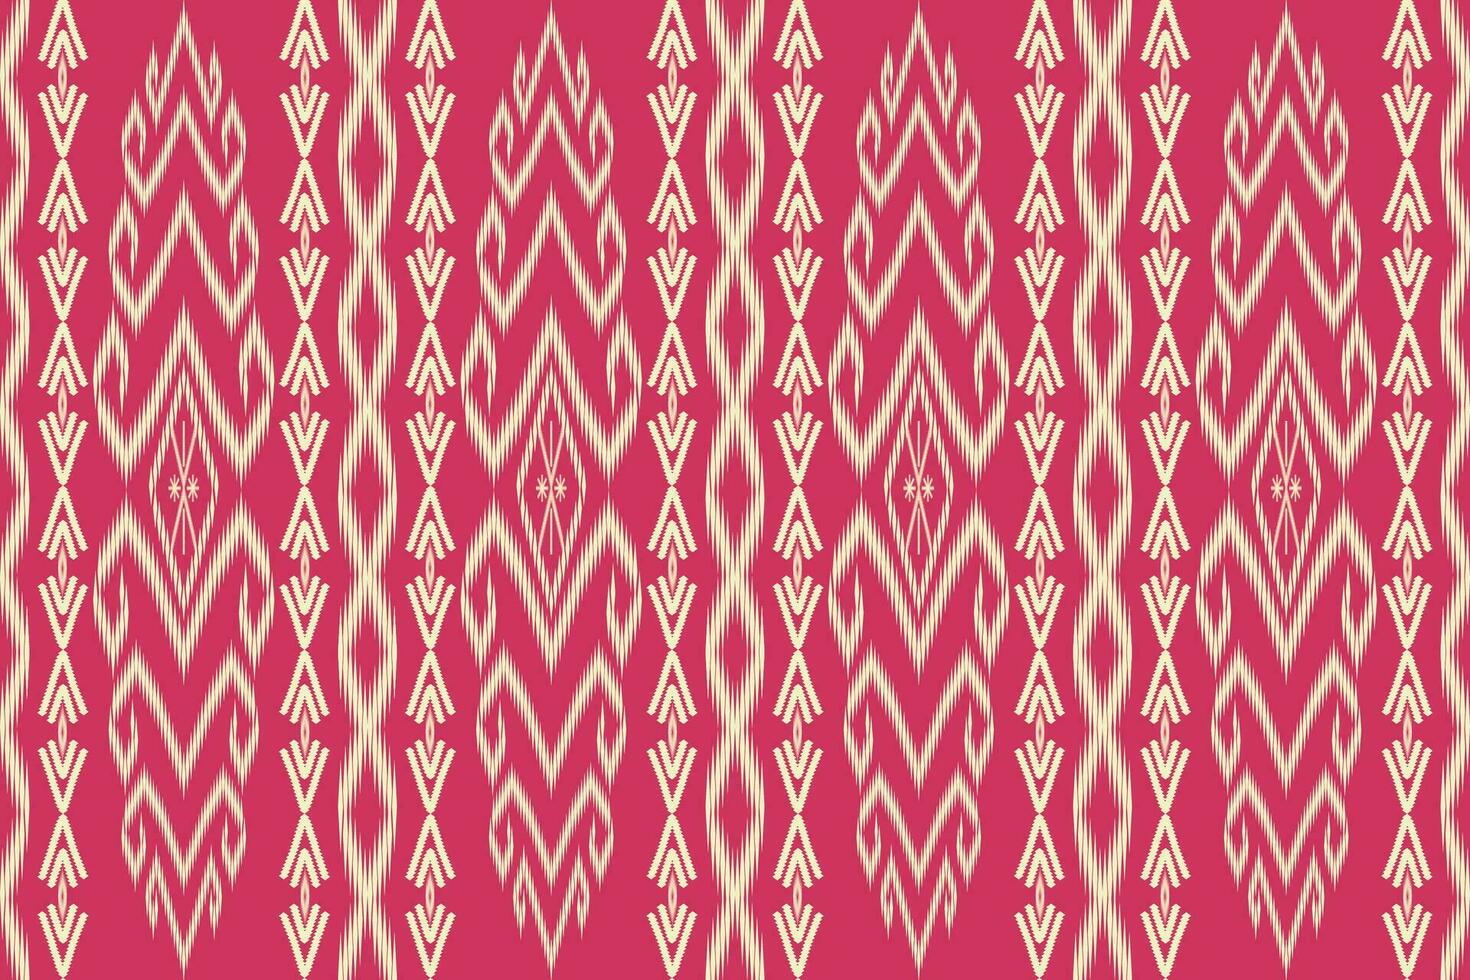 Abstract ethnic aztec geometric pattern design for background.Ethnic ikat geometric pattern for vibrant color.Colorful geometric embroidery for textiles,fabric,clothing,background,batik,knitwear vector